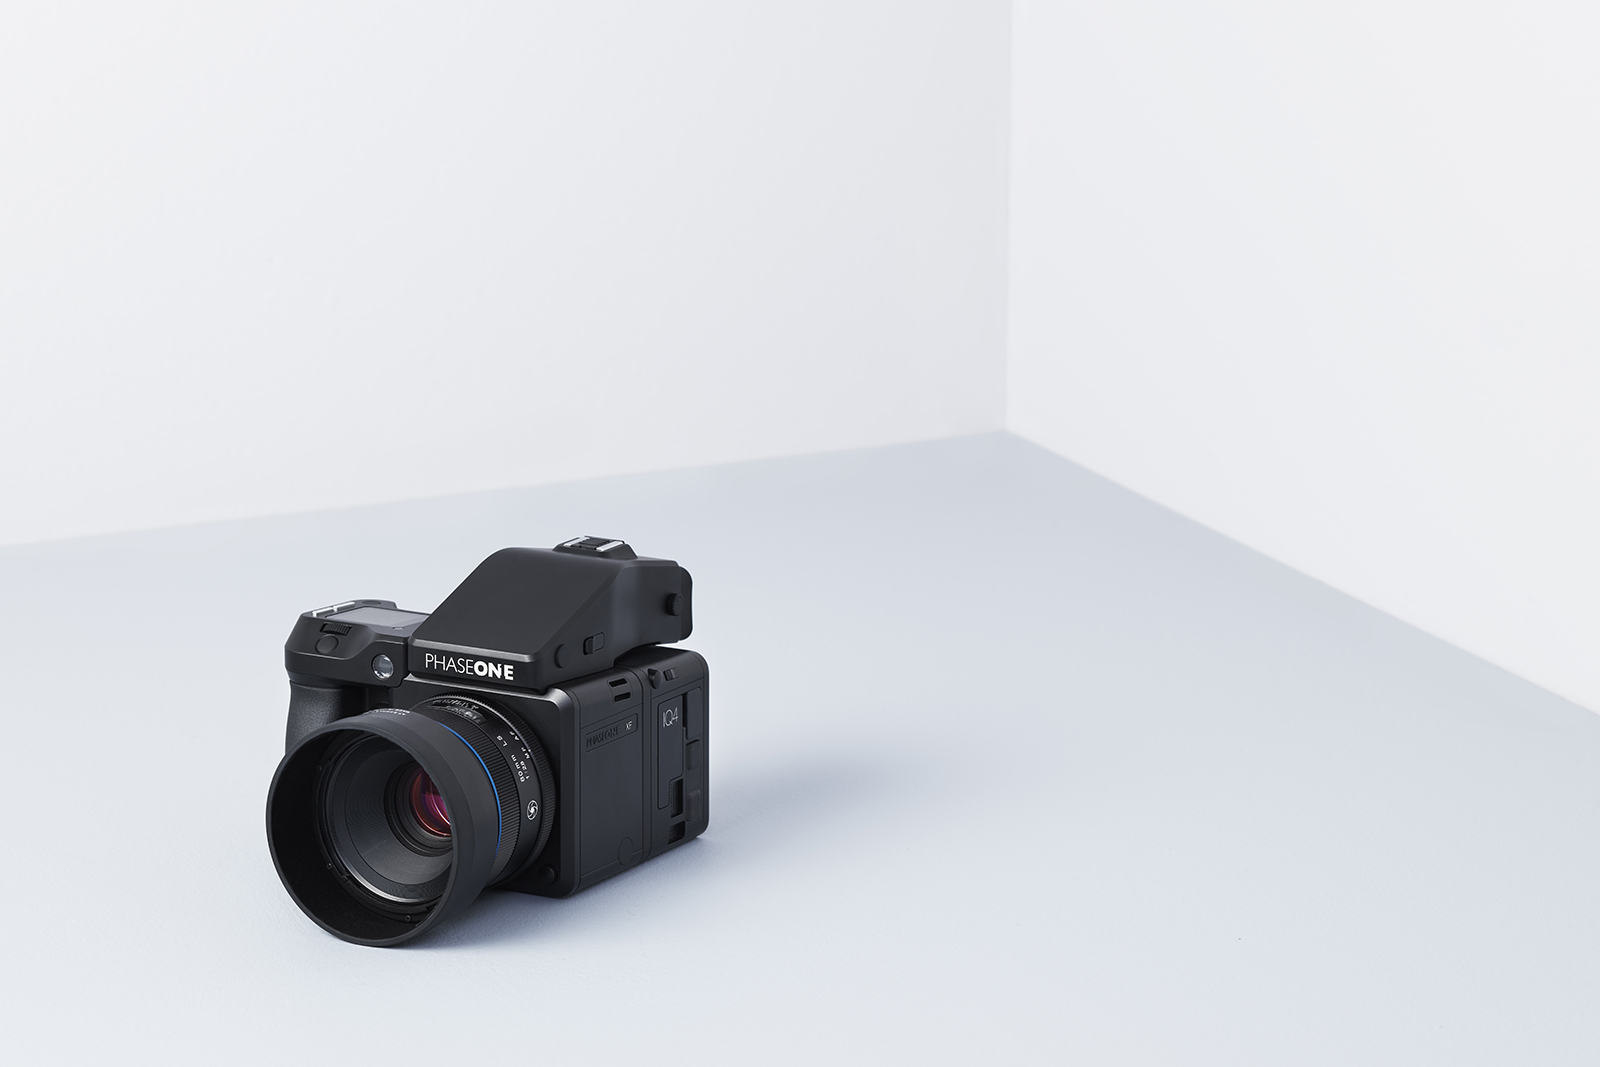 phase one infinity xf announced iq4 camera system standard kit